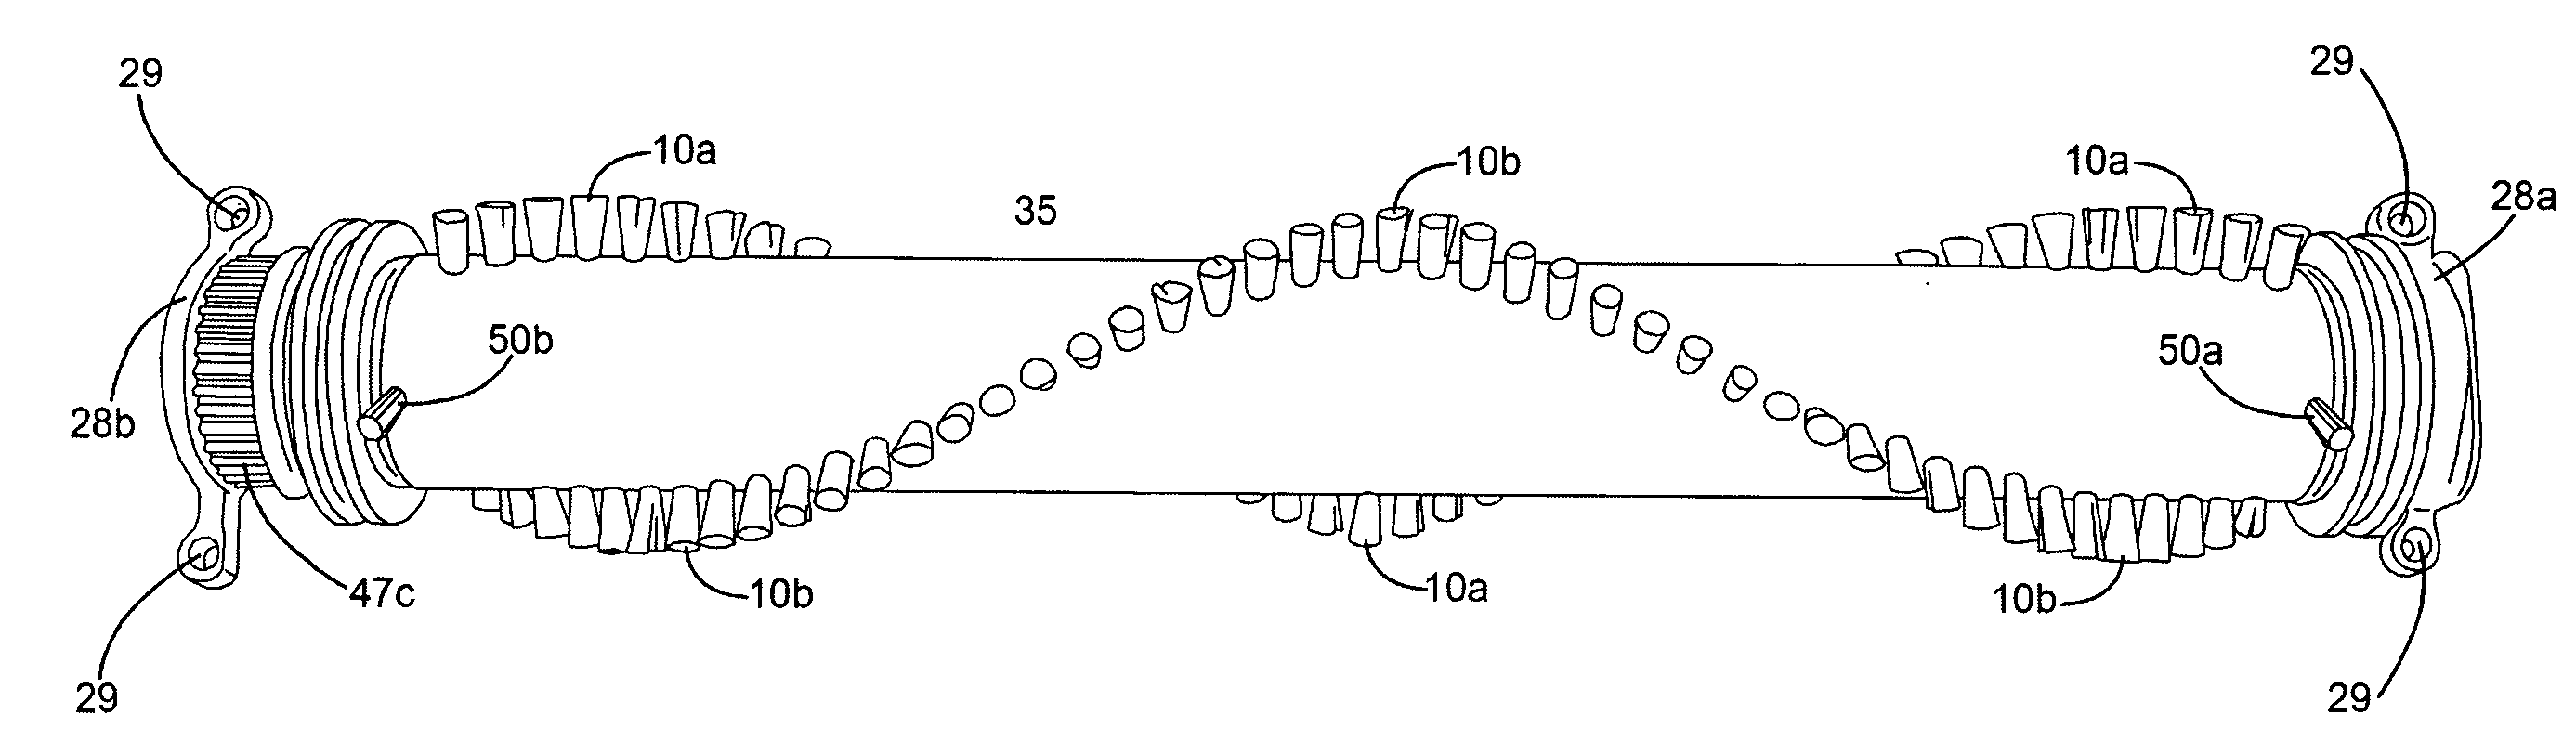 Triple-bearing bristled roller with comprehensive thread guard system